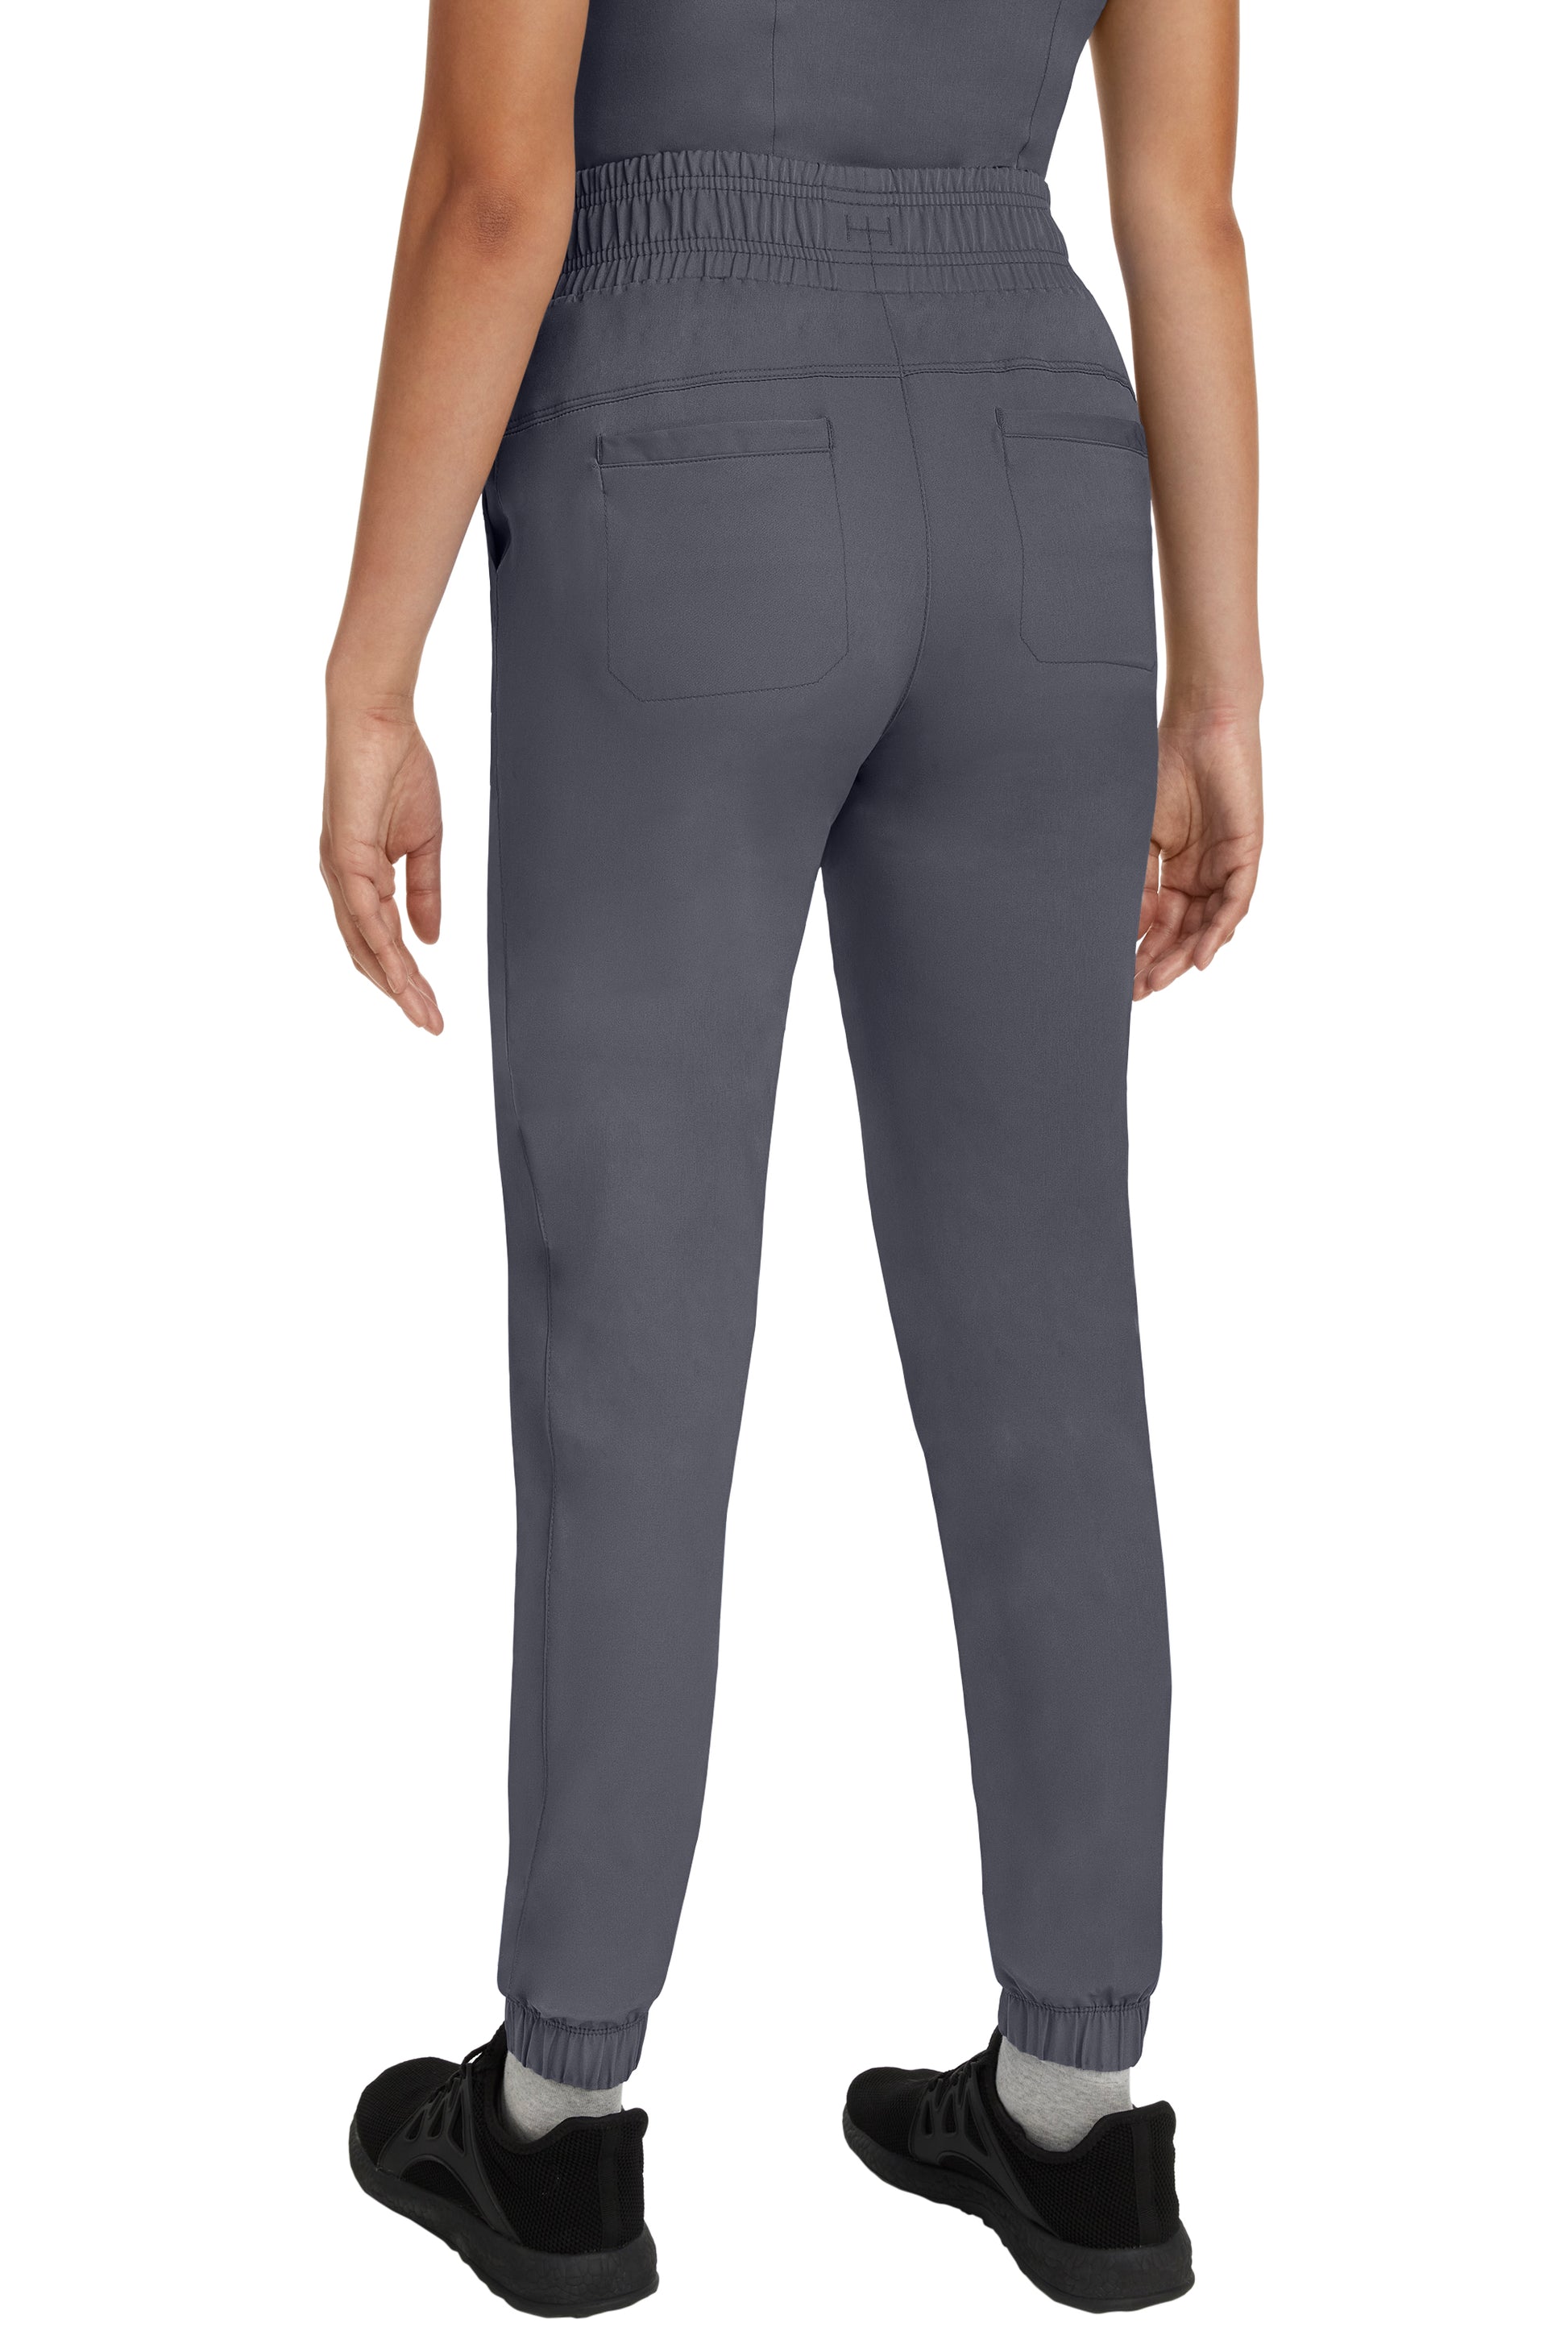 Healing Hands HH Works 9575 Renee Jogger Pant – Valley West Uniforms